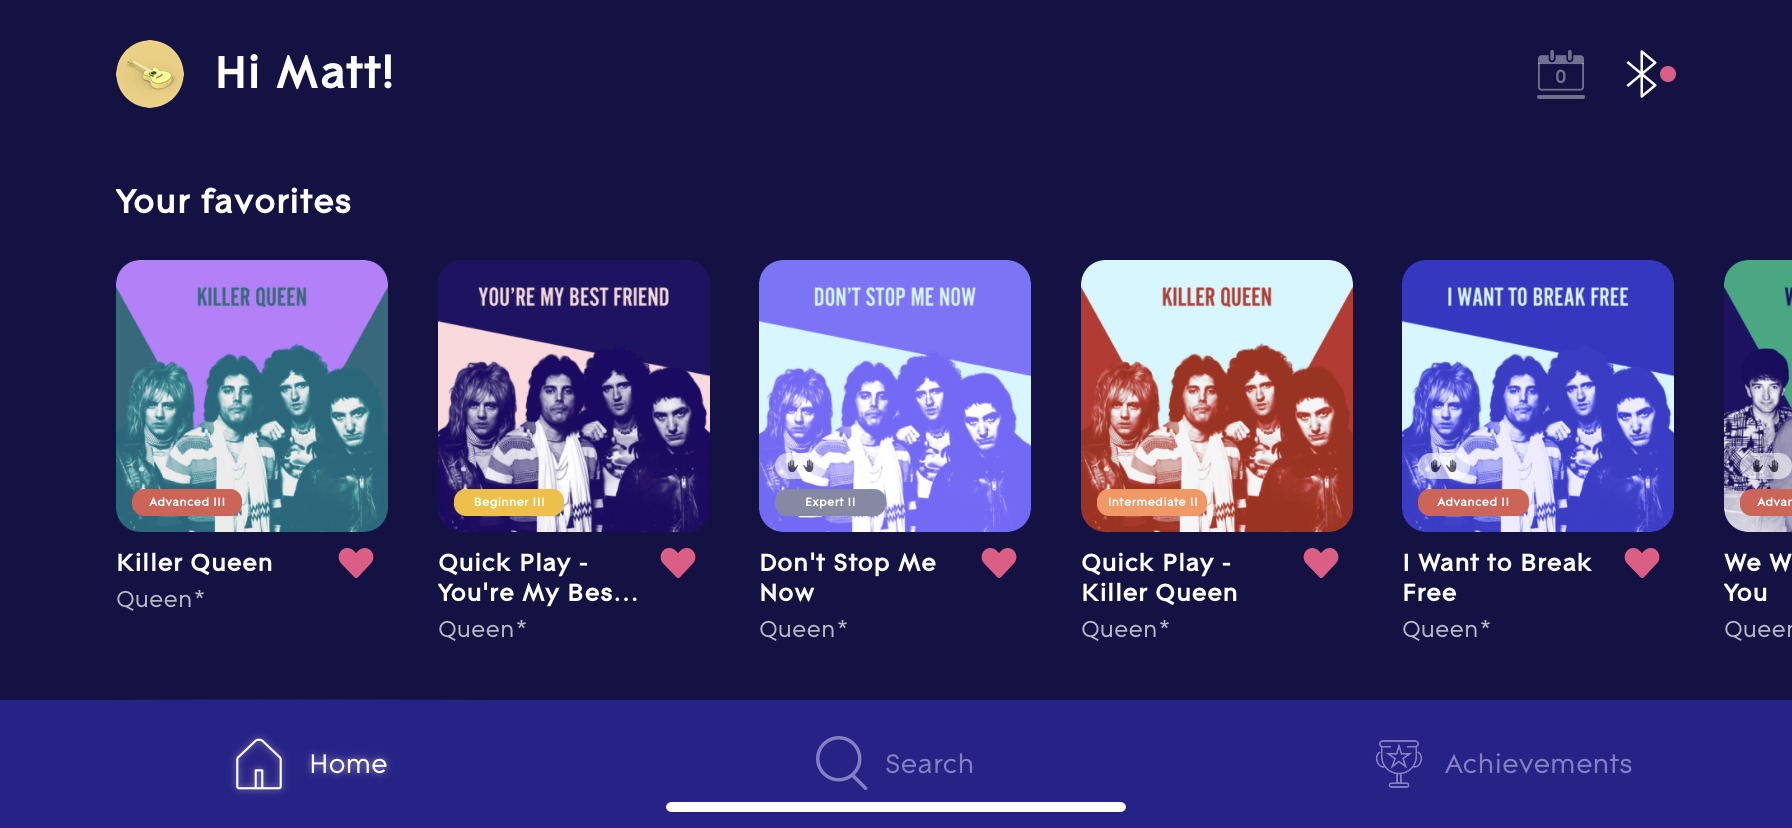 View of Queen songs in the LUMI app, arranged according to difficulty level